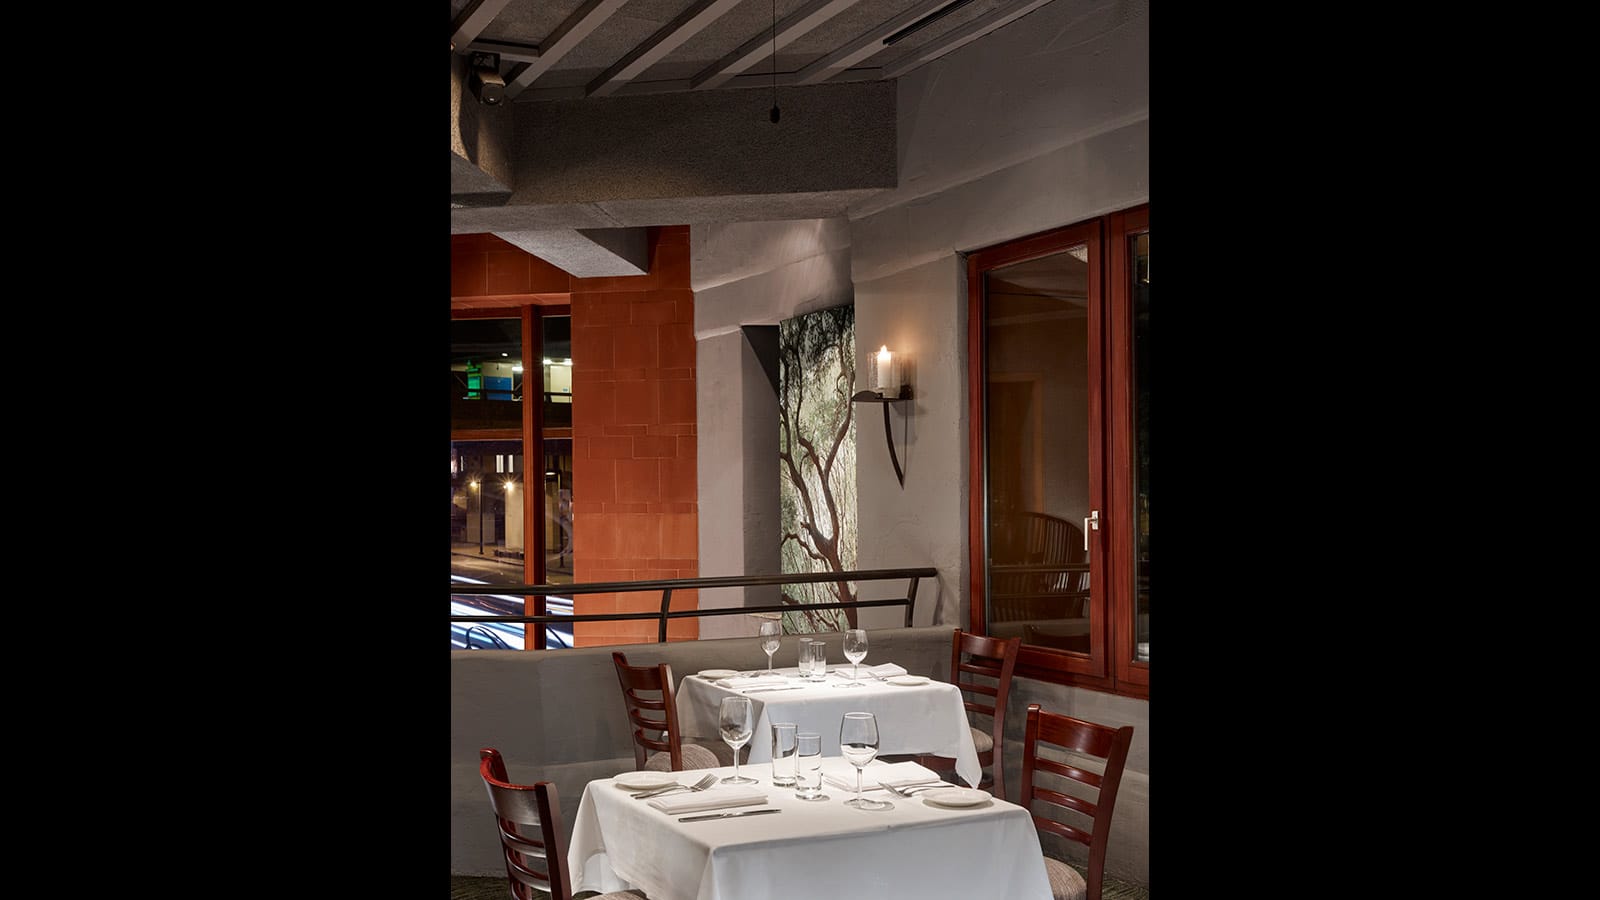 Oliveto Restaurant and Cafe Collaborates with Meyer Sound to Create Exceptional Dining Experience